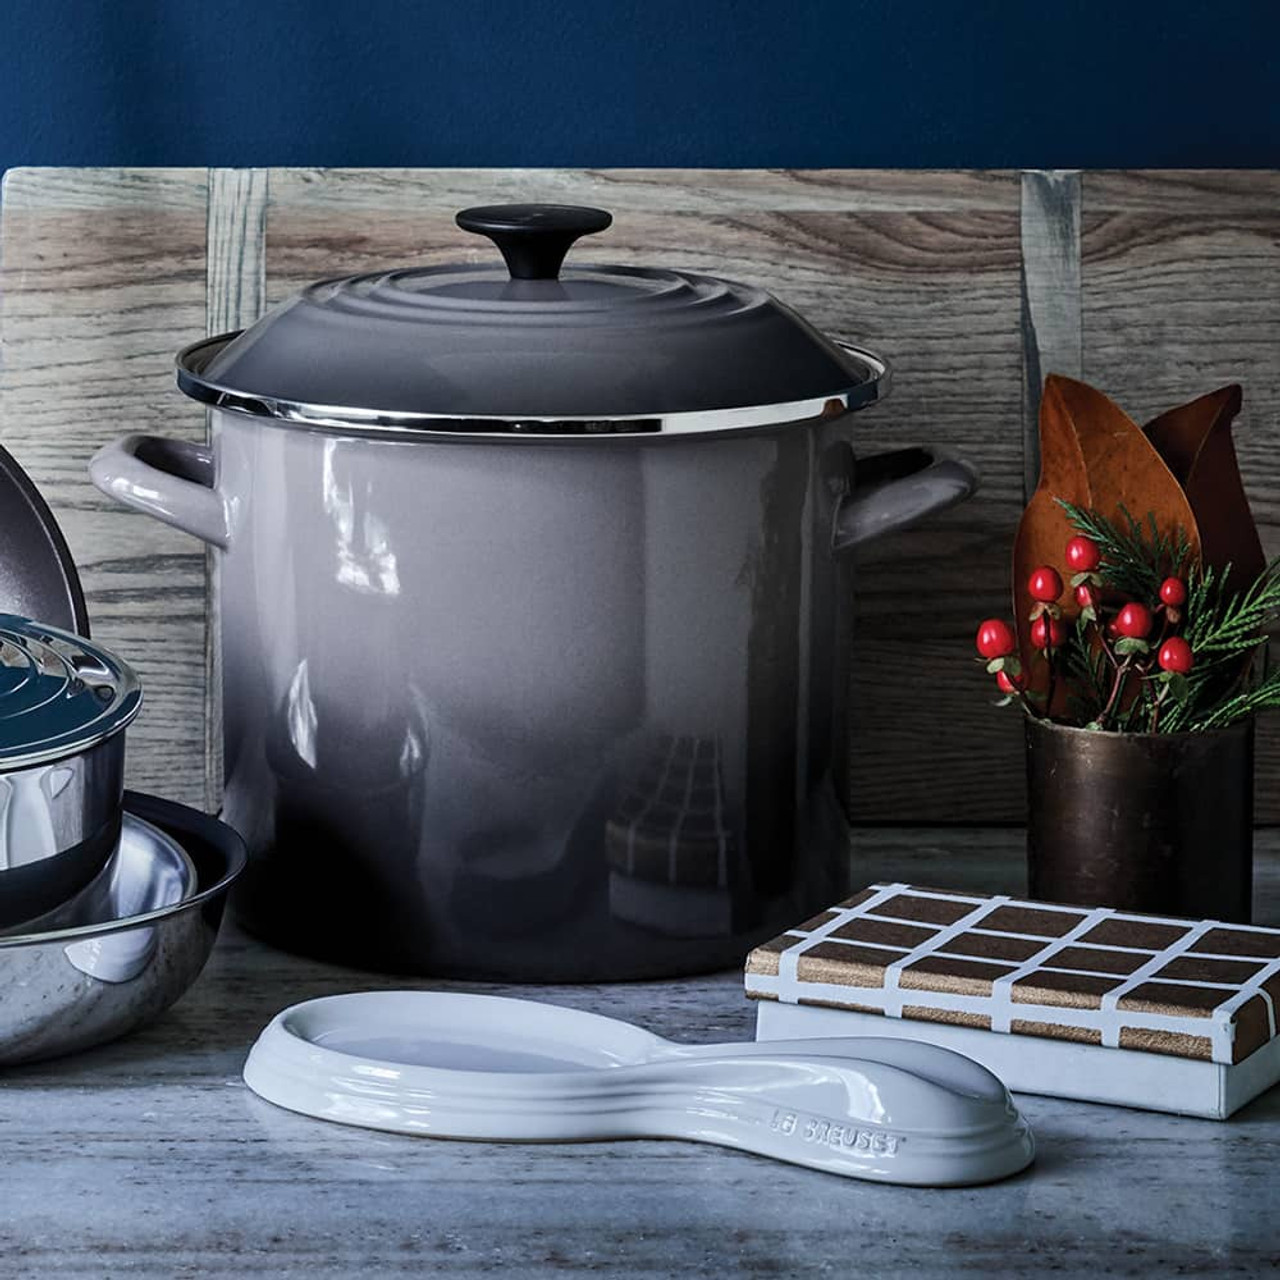 https://cdn11.bigcommerce.com/s-hccytny0od/images/stencil/1280x1280/products/1817/6307/le-creuset-stockpot-oyster__65670.1576598879.jpg?c=2?imbypass=on